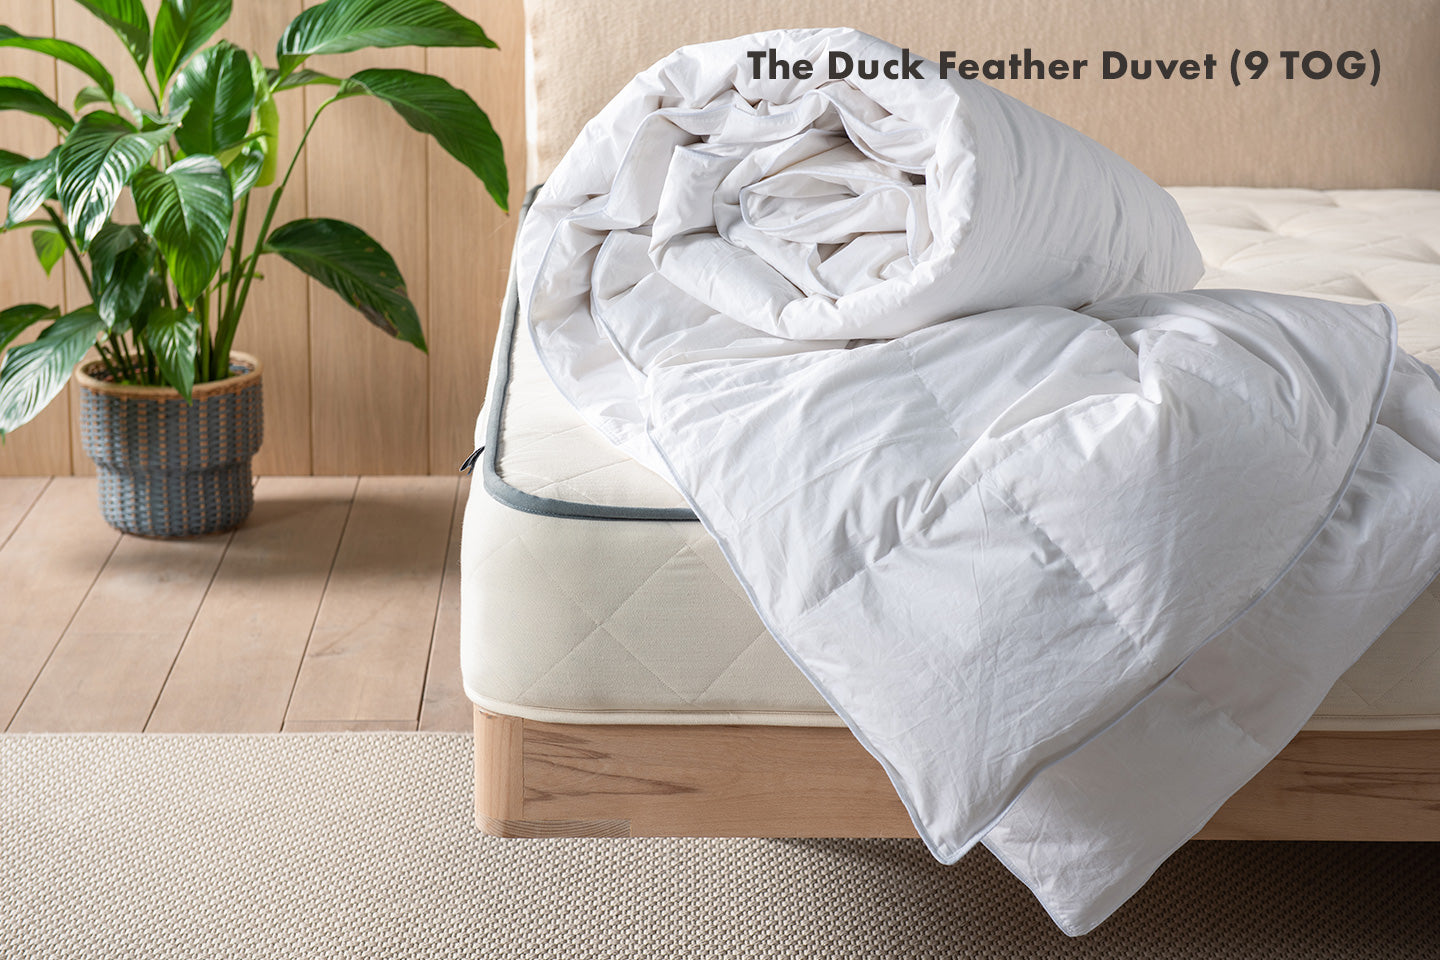 The Duck Feather Duvet - 9 TOG